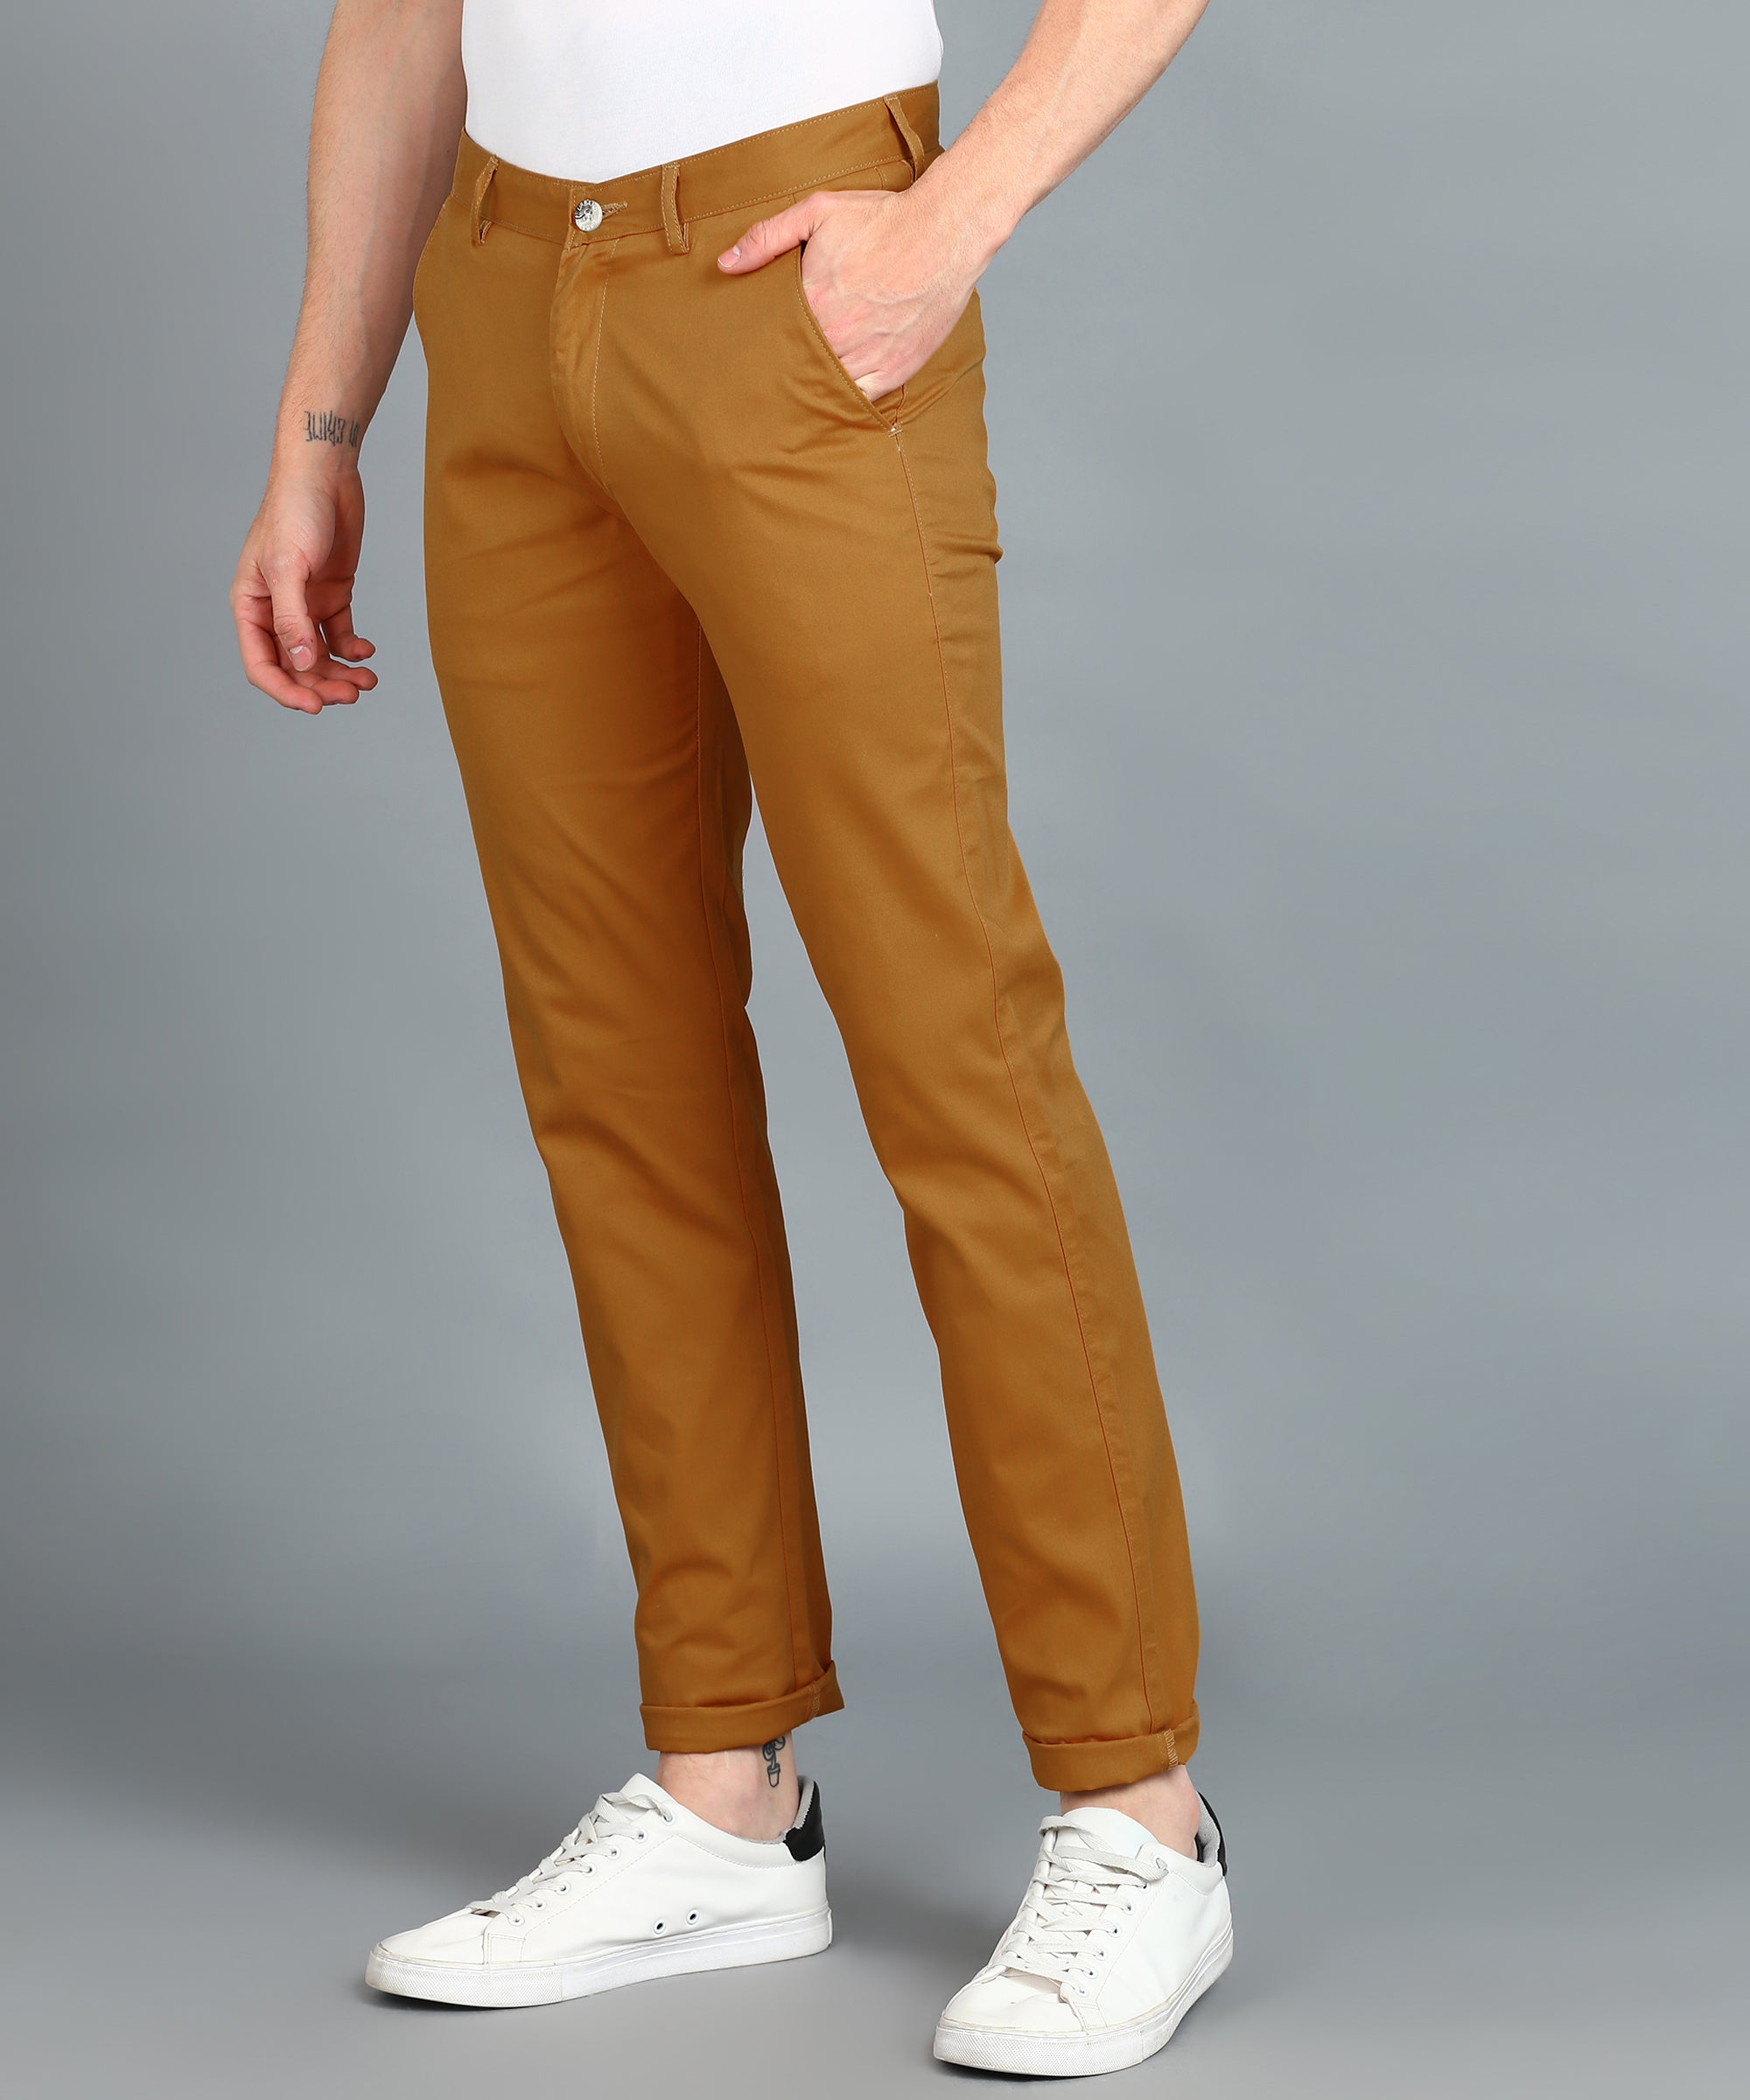 Urbano Fashion Men's Yellow Cotton Light Weight Non-Stretch Slim Fit Casual Trousers